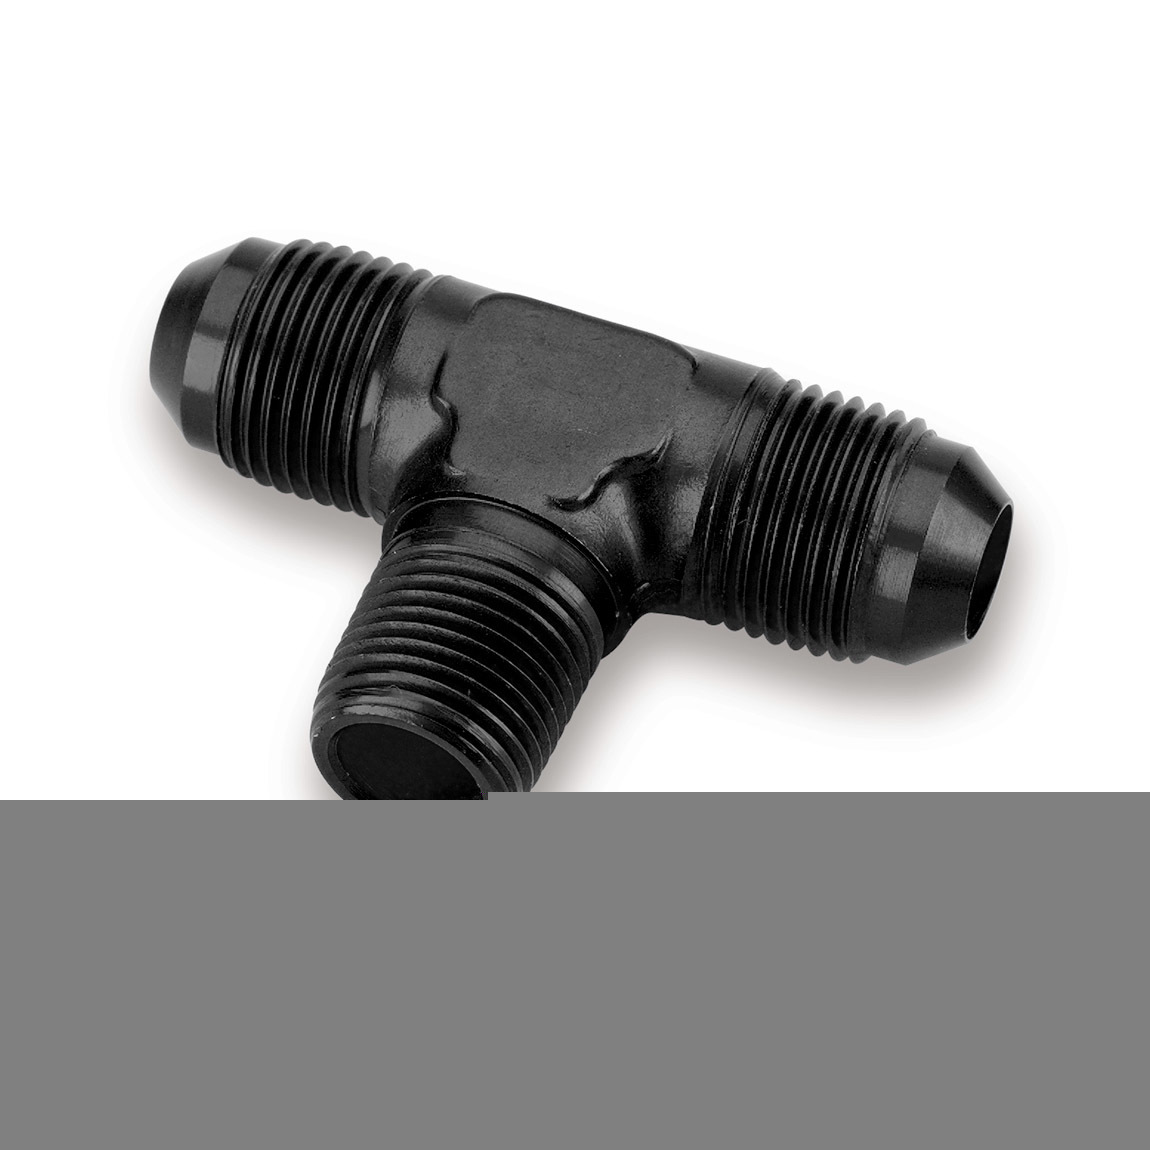 Earls AT982508ERL Fitting, Adapter Tee, 8 AN Male x 8 AN Male x 3/8 in NPT Male, Aluminum, Black Anodized, Each